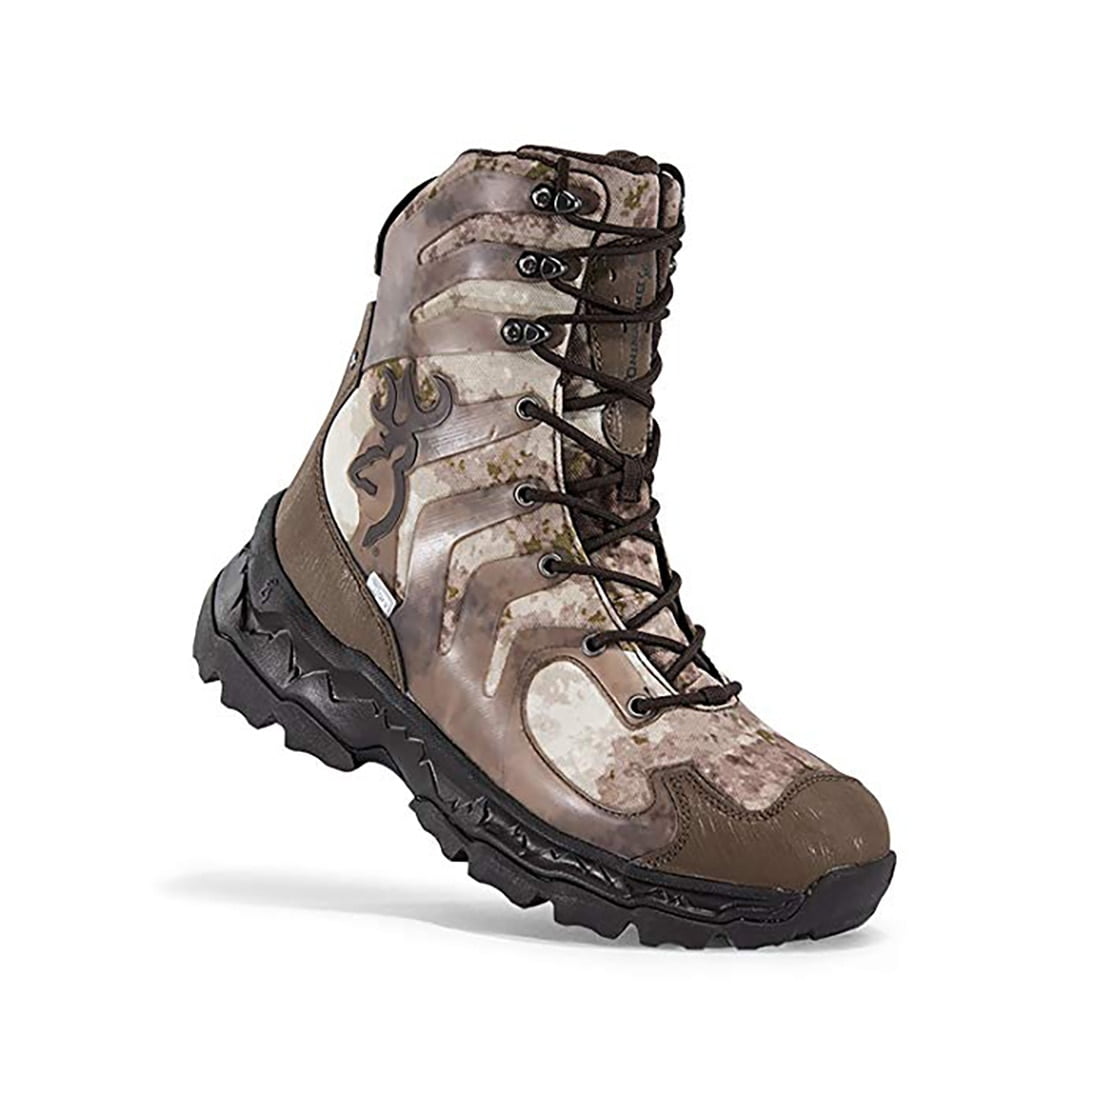 Browning - Browning Mens Buck Shadow 8 inch Waterproof Boots 11D (M) US ...